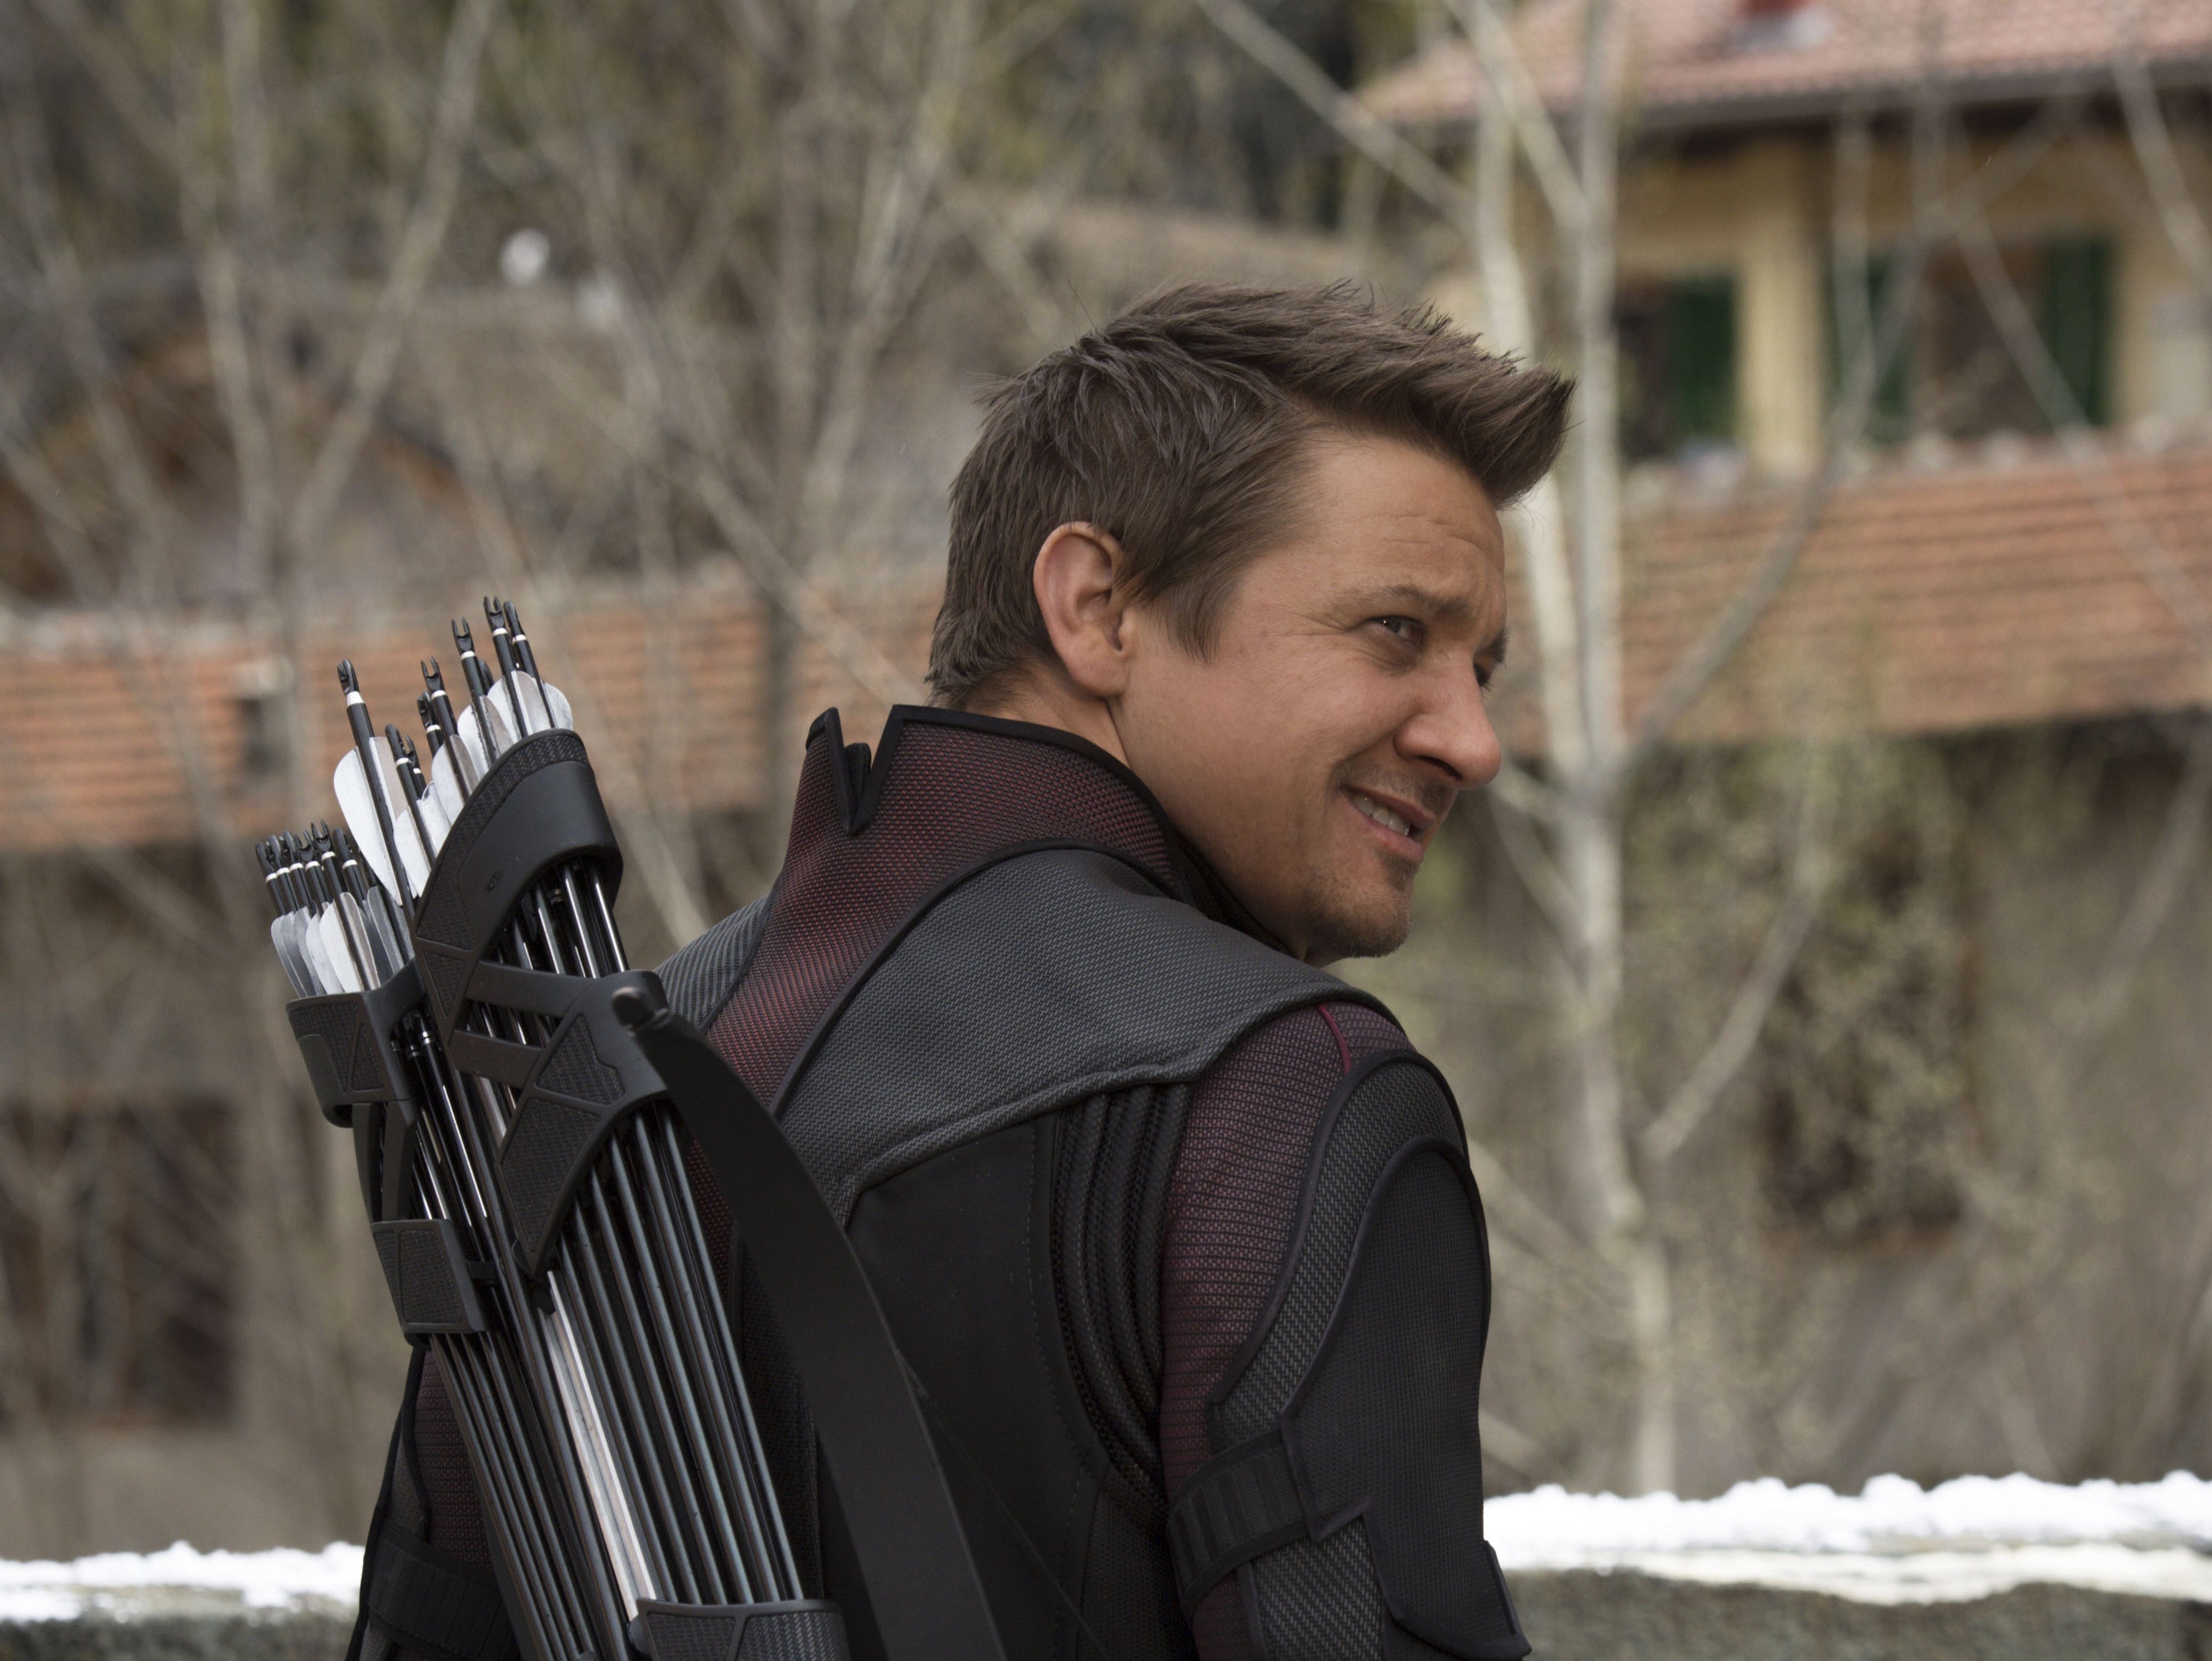 Jeremy Renner in character as Hawkeye